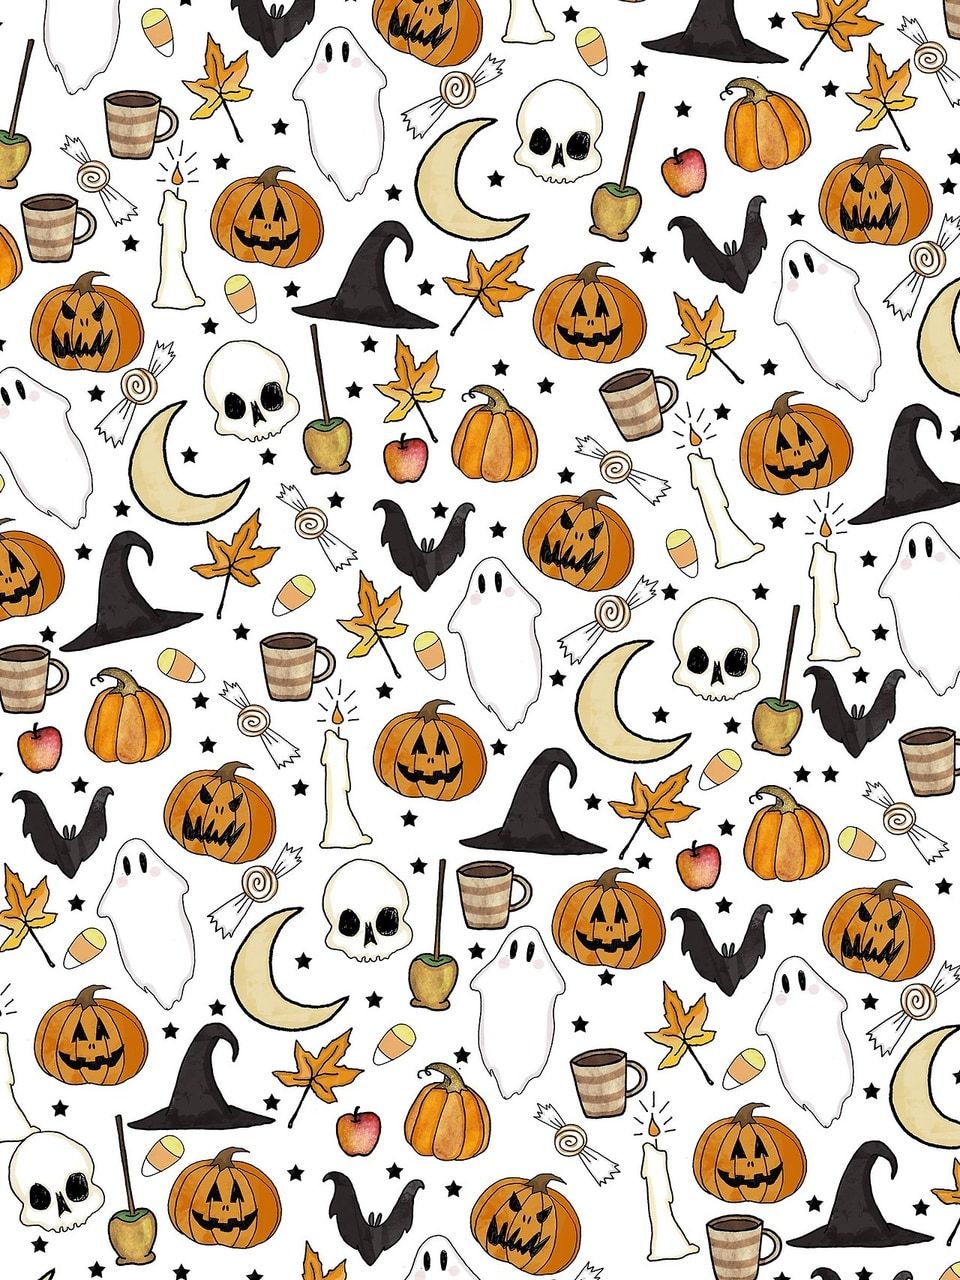 Let's Get the Halloween Vibes with Aesthetic Wallpaper